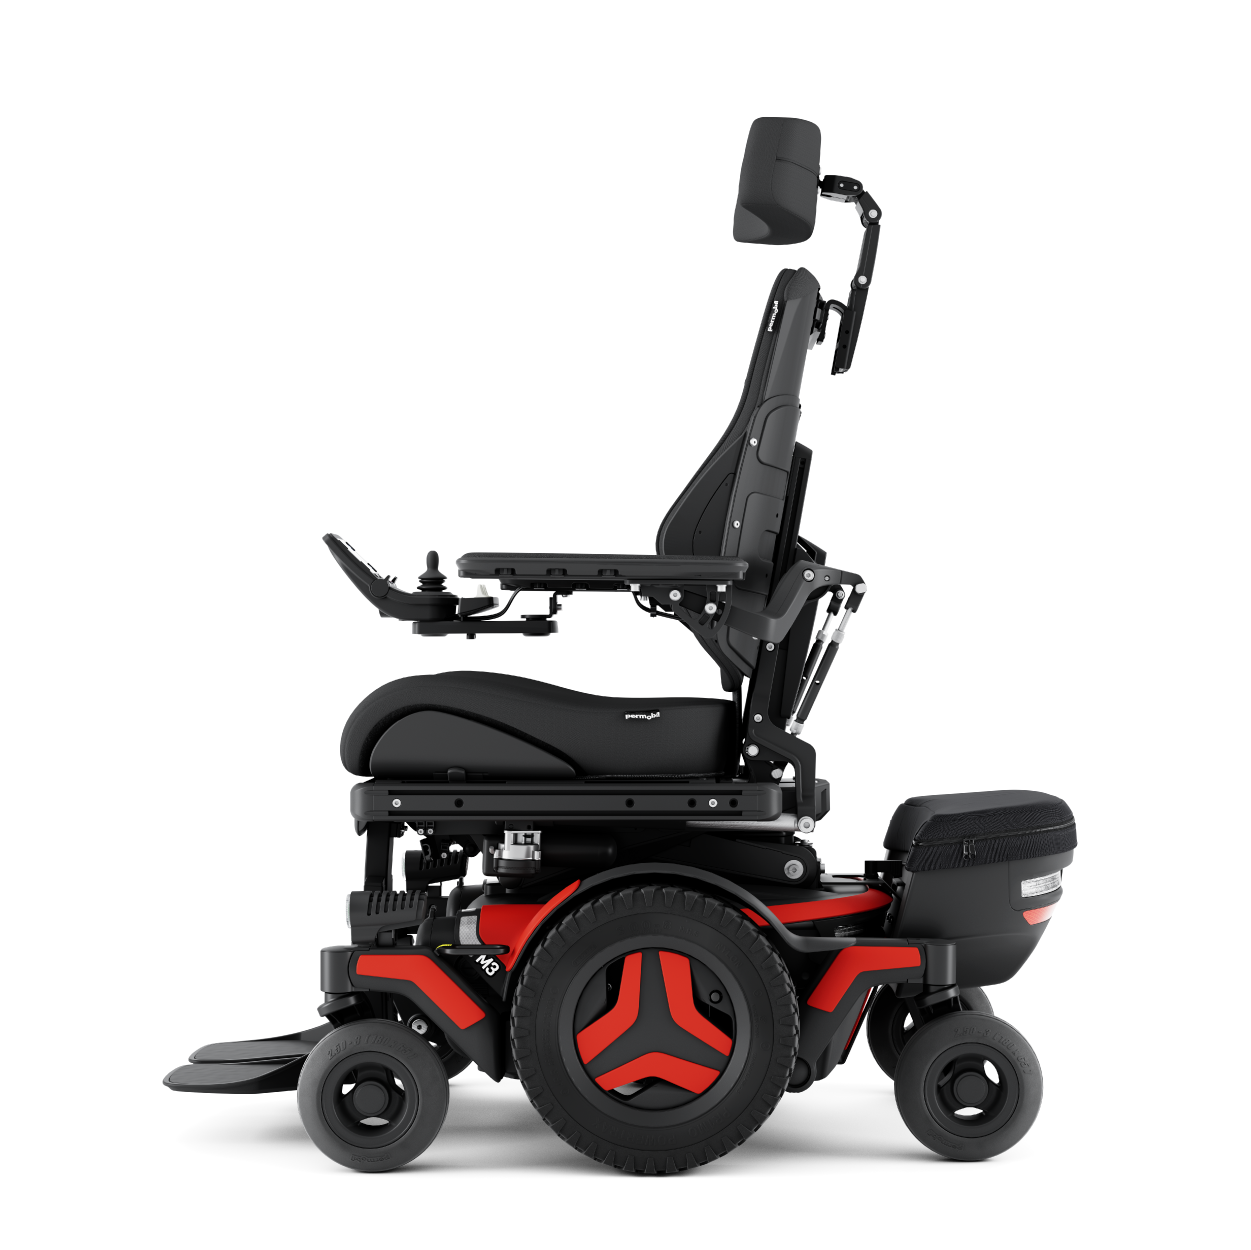 The Permobil M3 Corpus power wheelchair with red accents, shown with black rehab seating from the side.